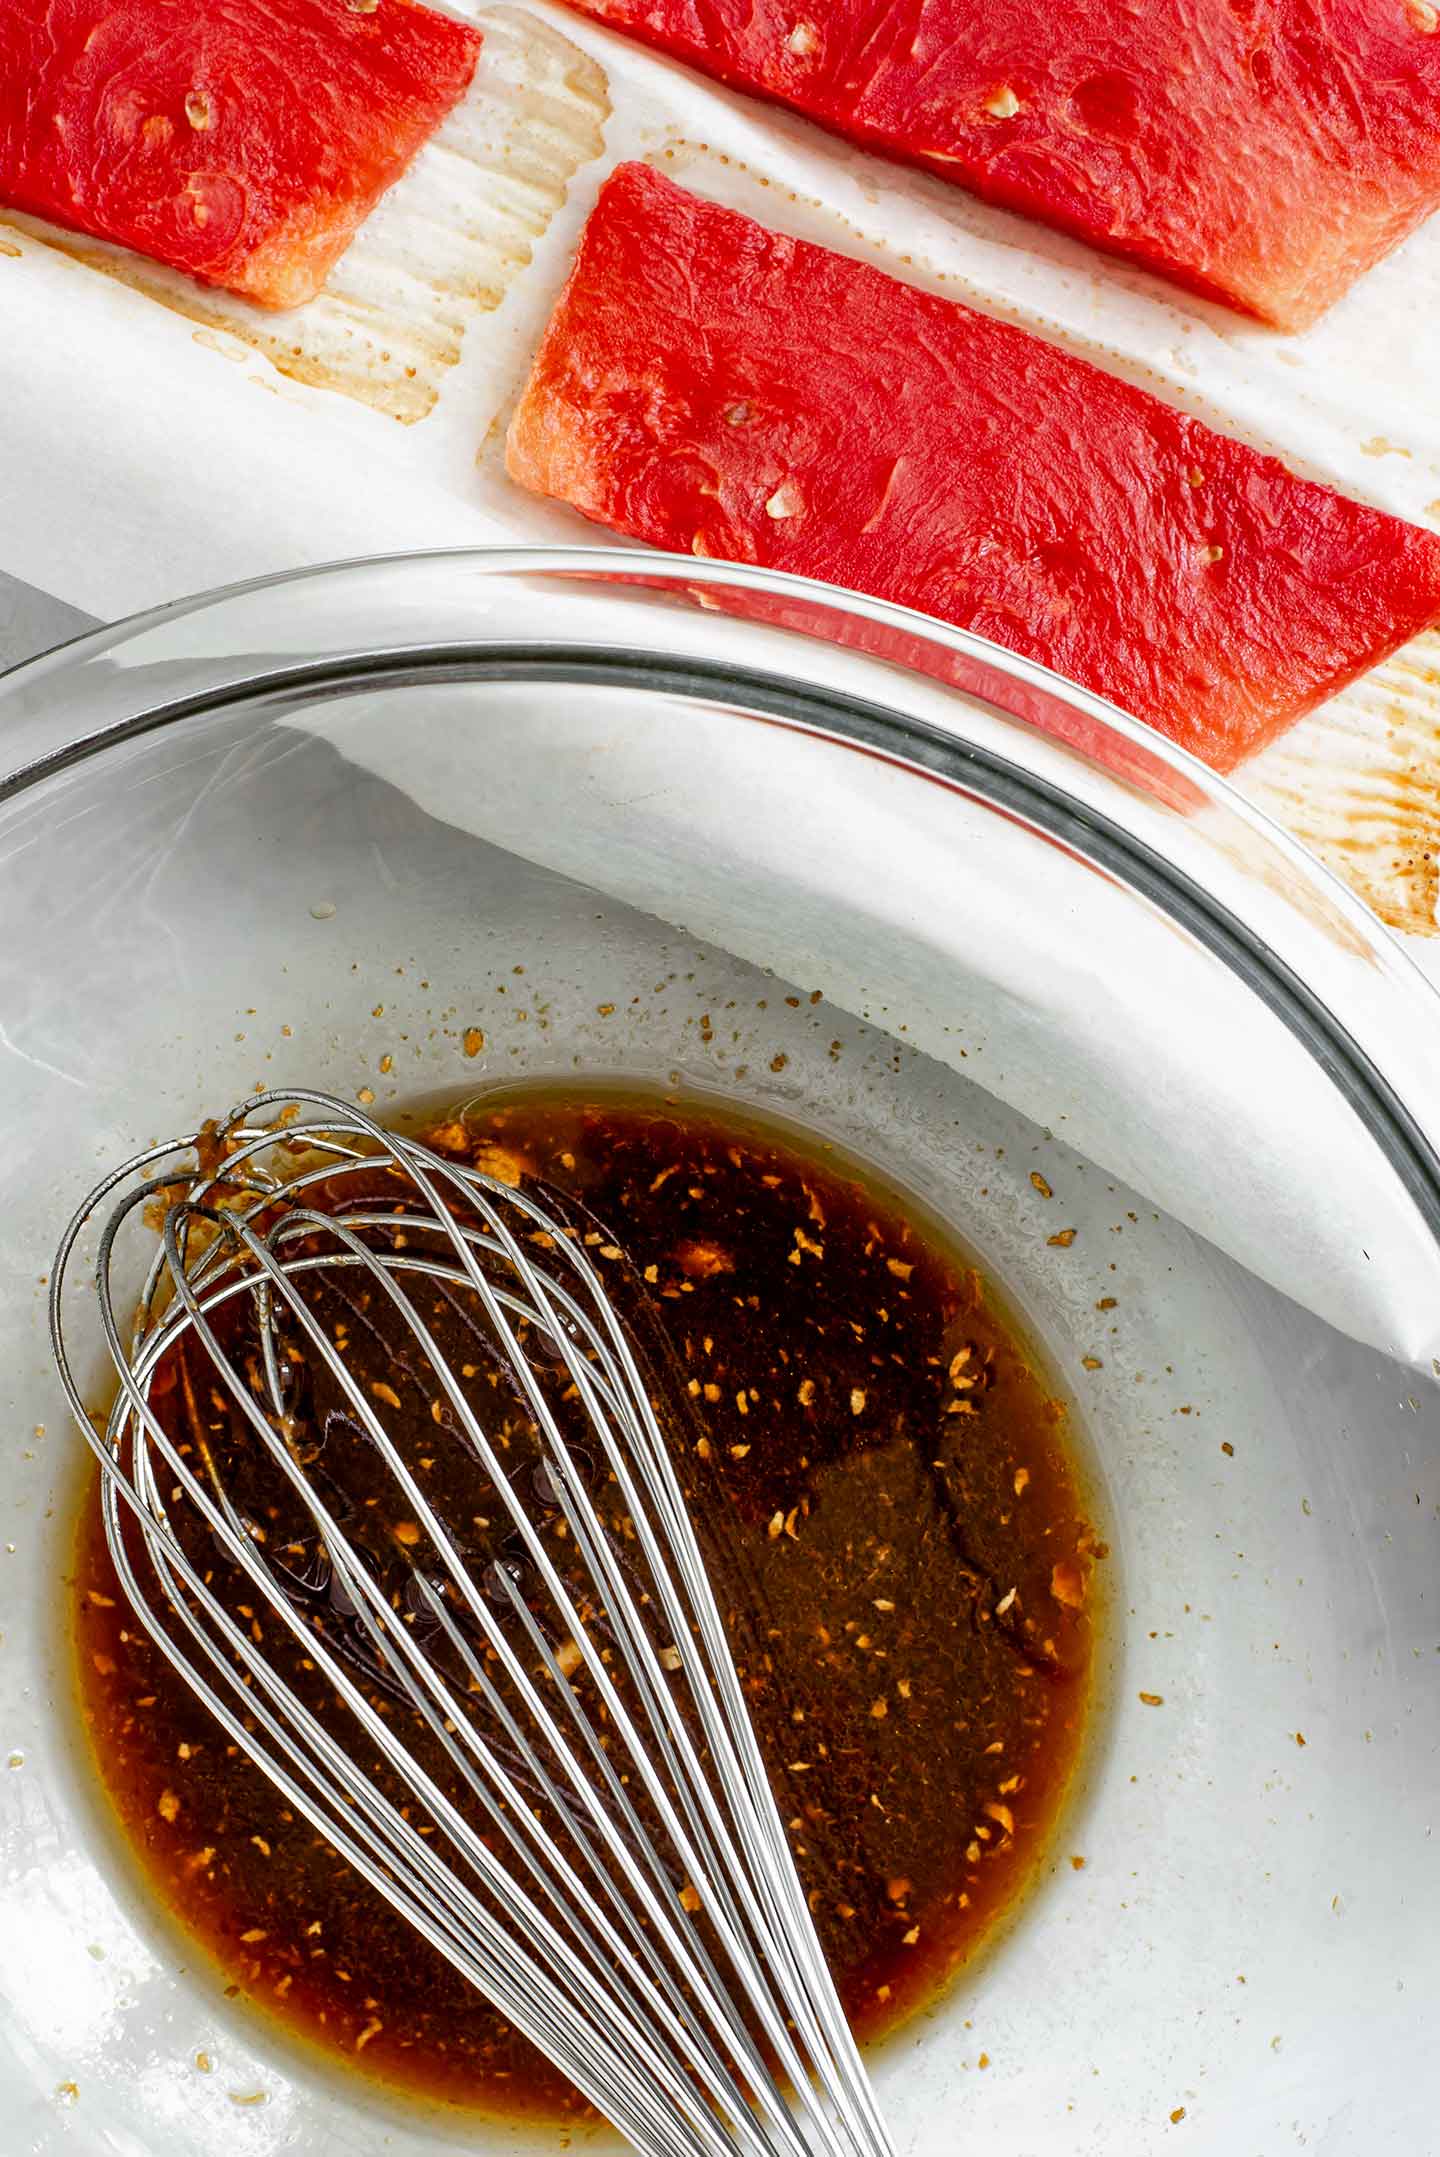 Top down view of the salty, spicy, tangy marinade being whisked in a bowl with the baked steaks on a tray.